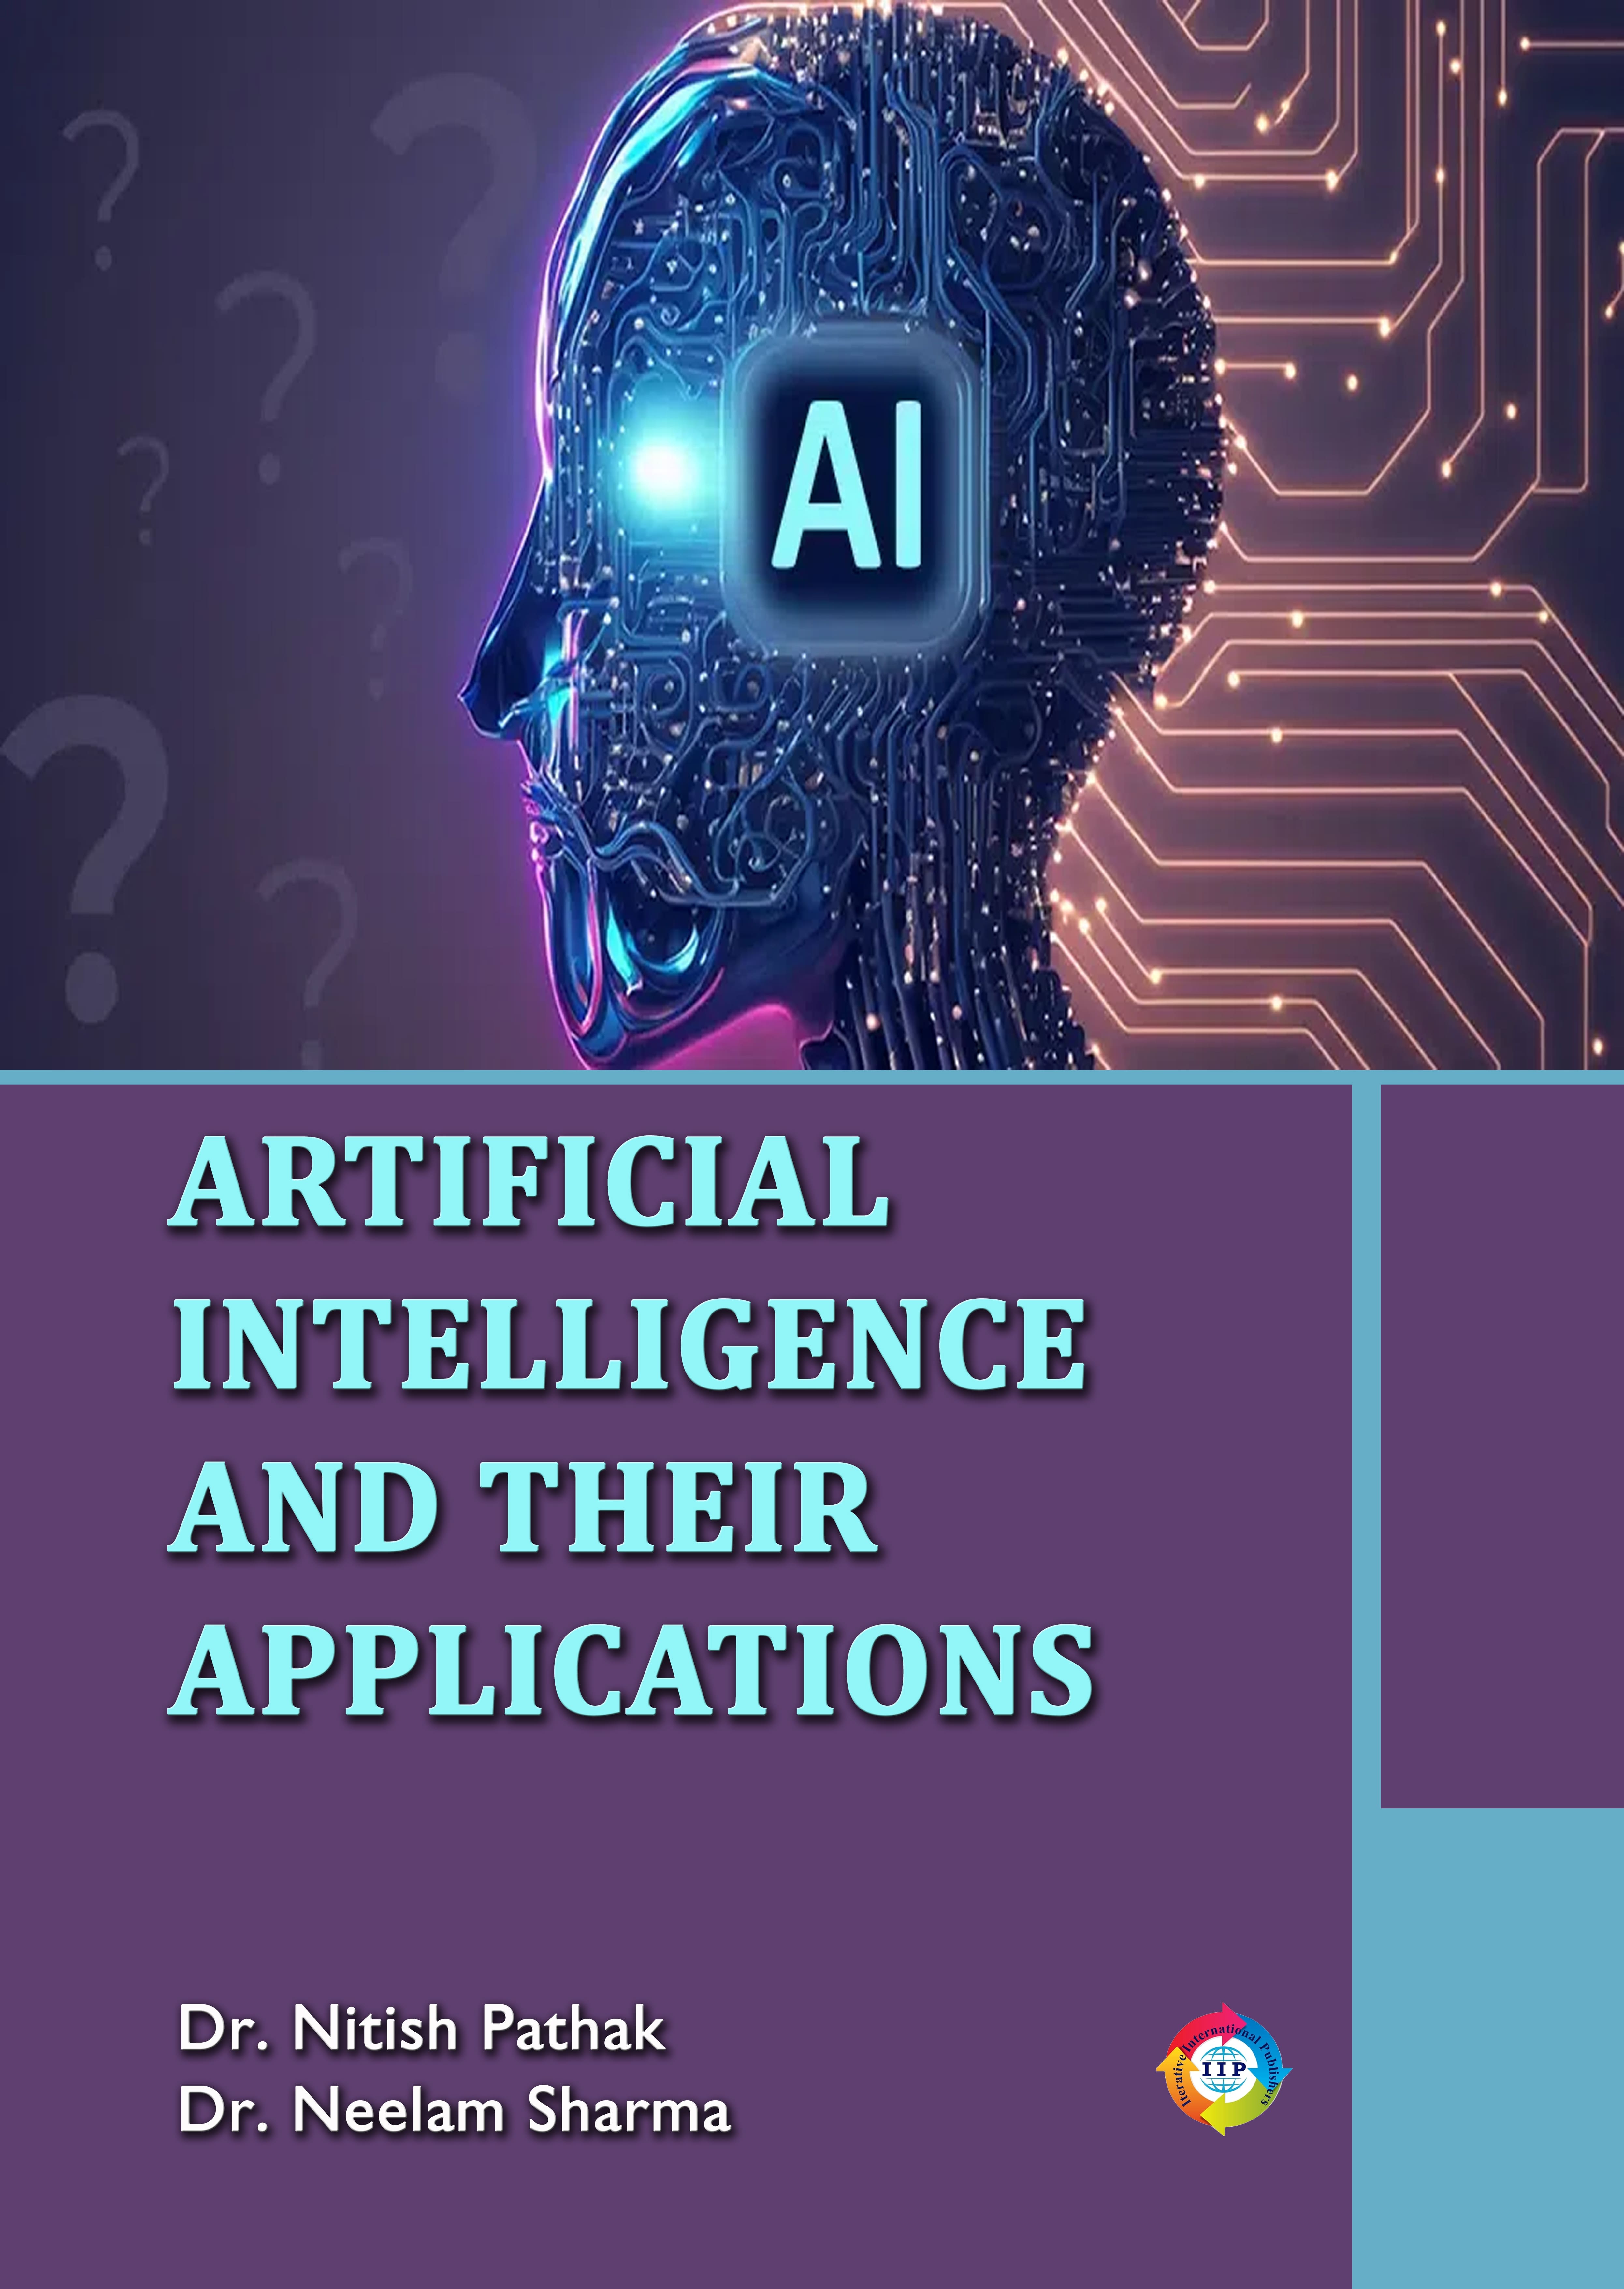 Artificial Intelligence and their Applications